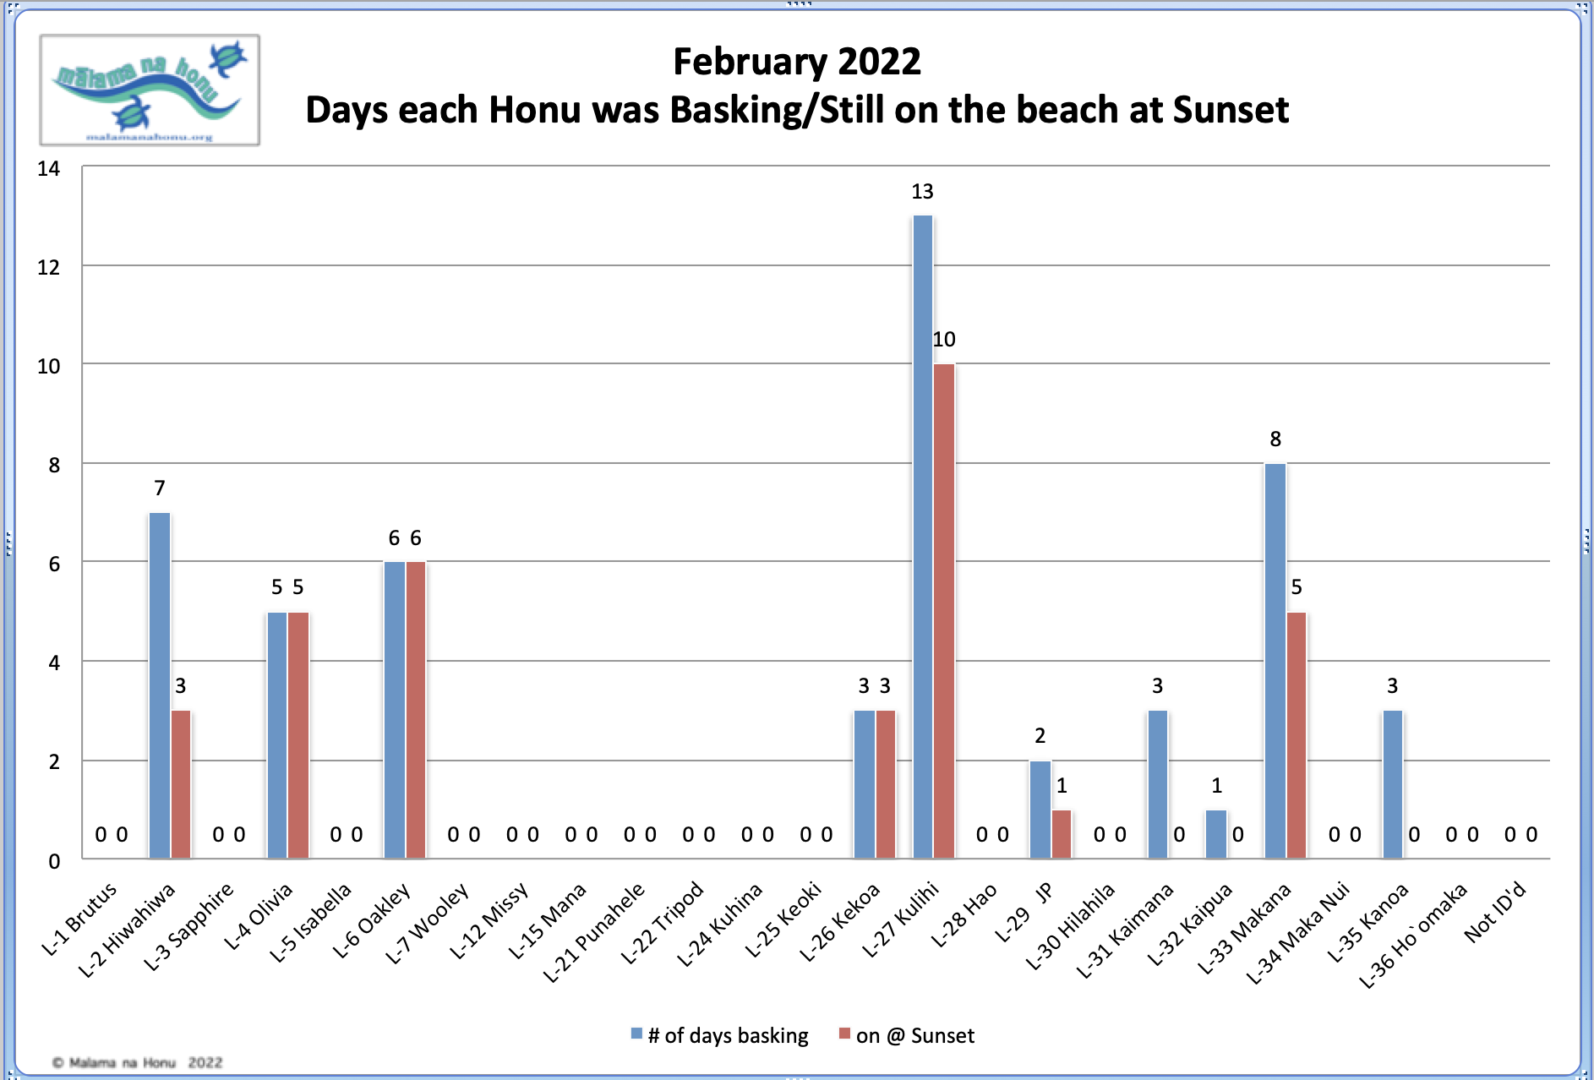 February 2022 Days each Honu was Basking/Still on the beach at Sunset